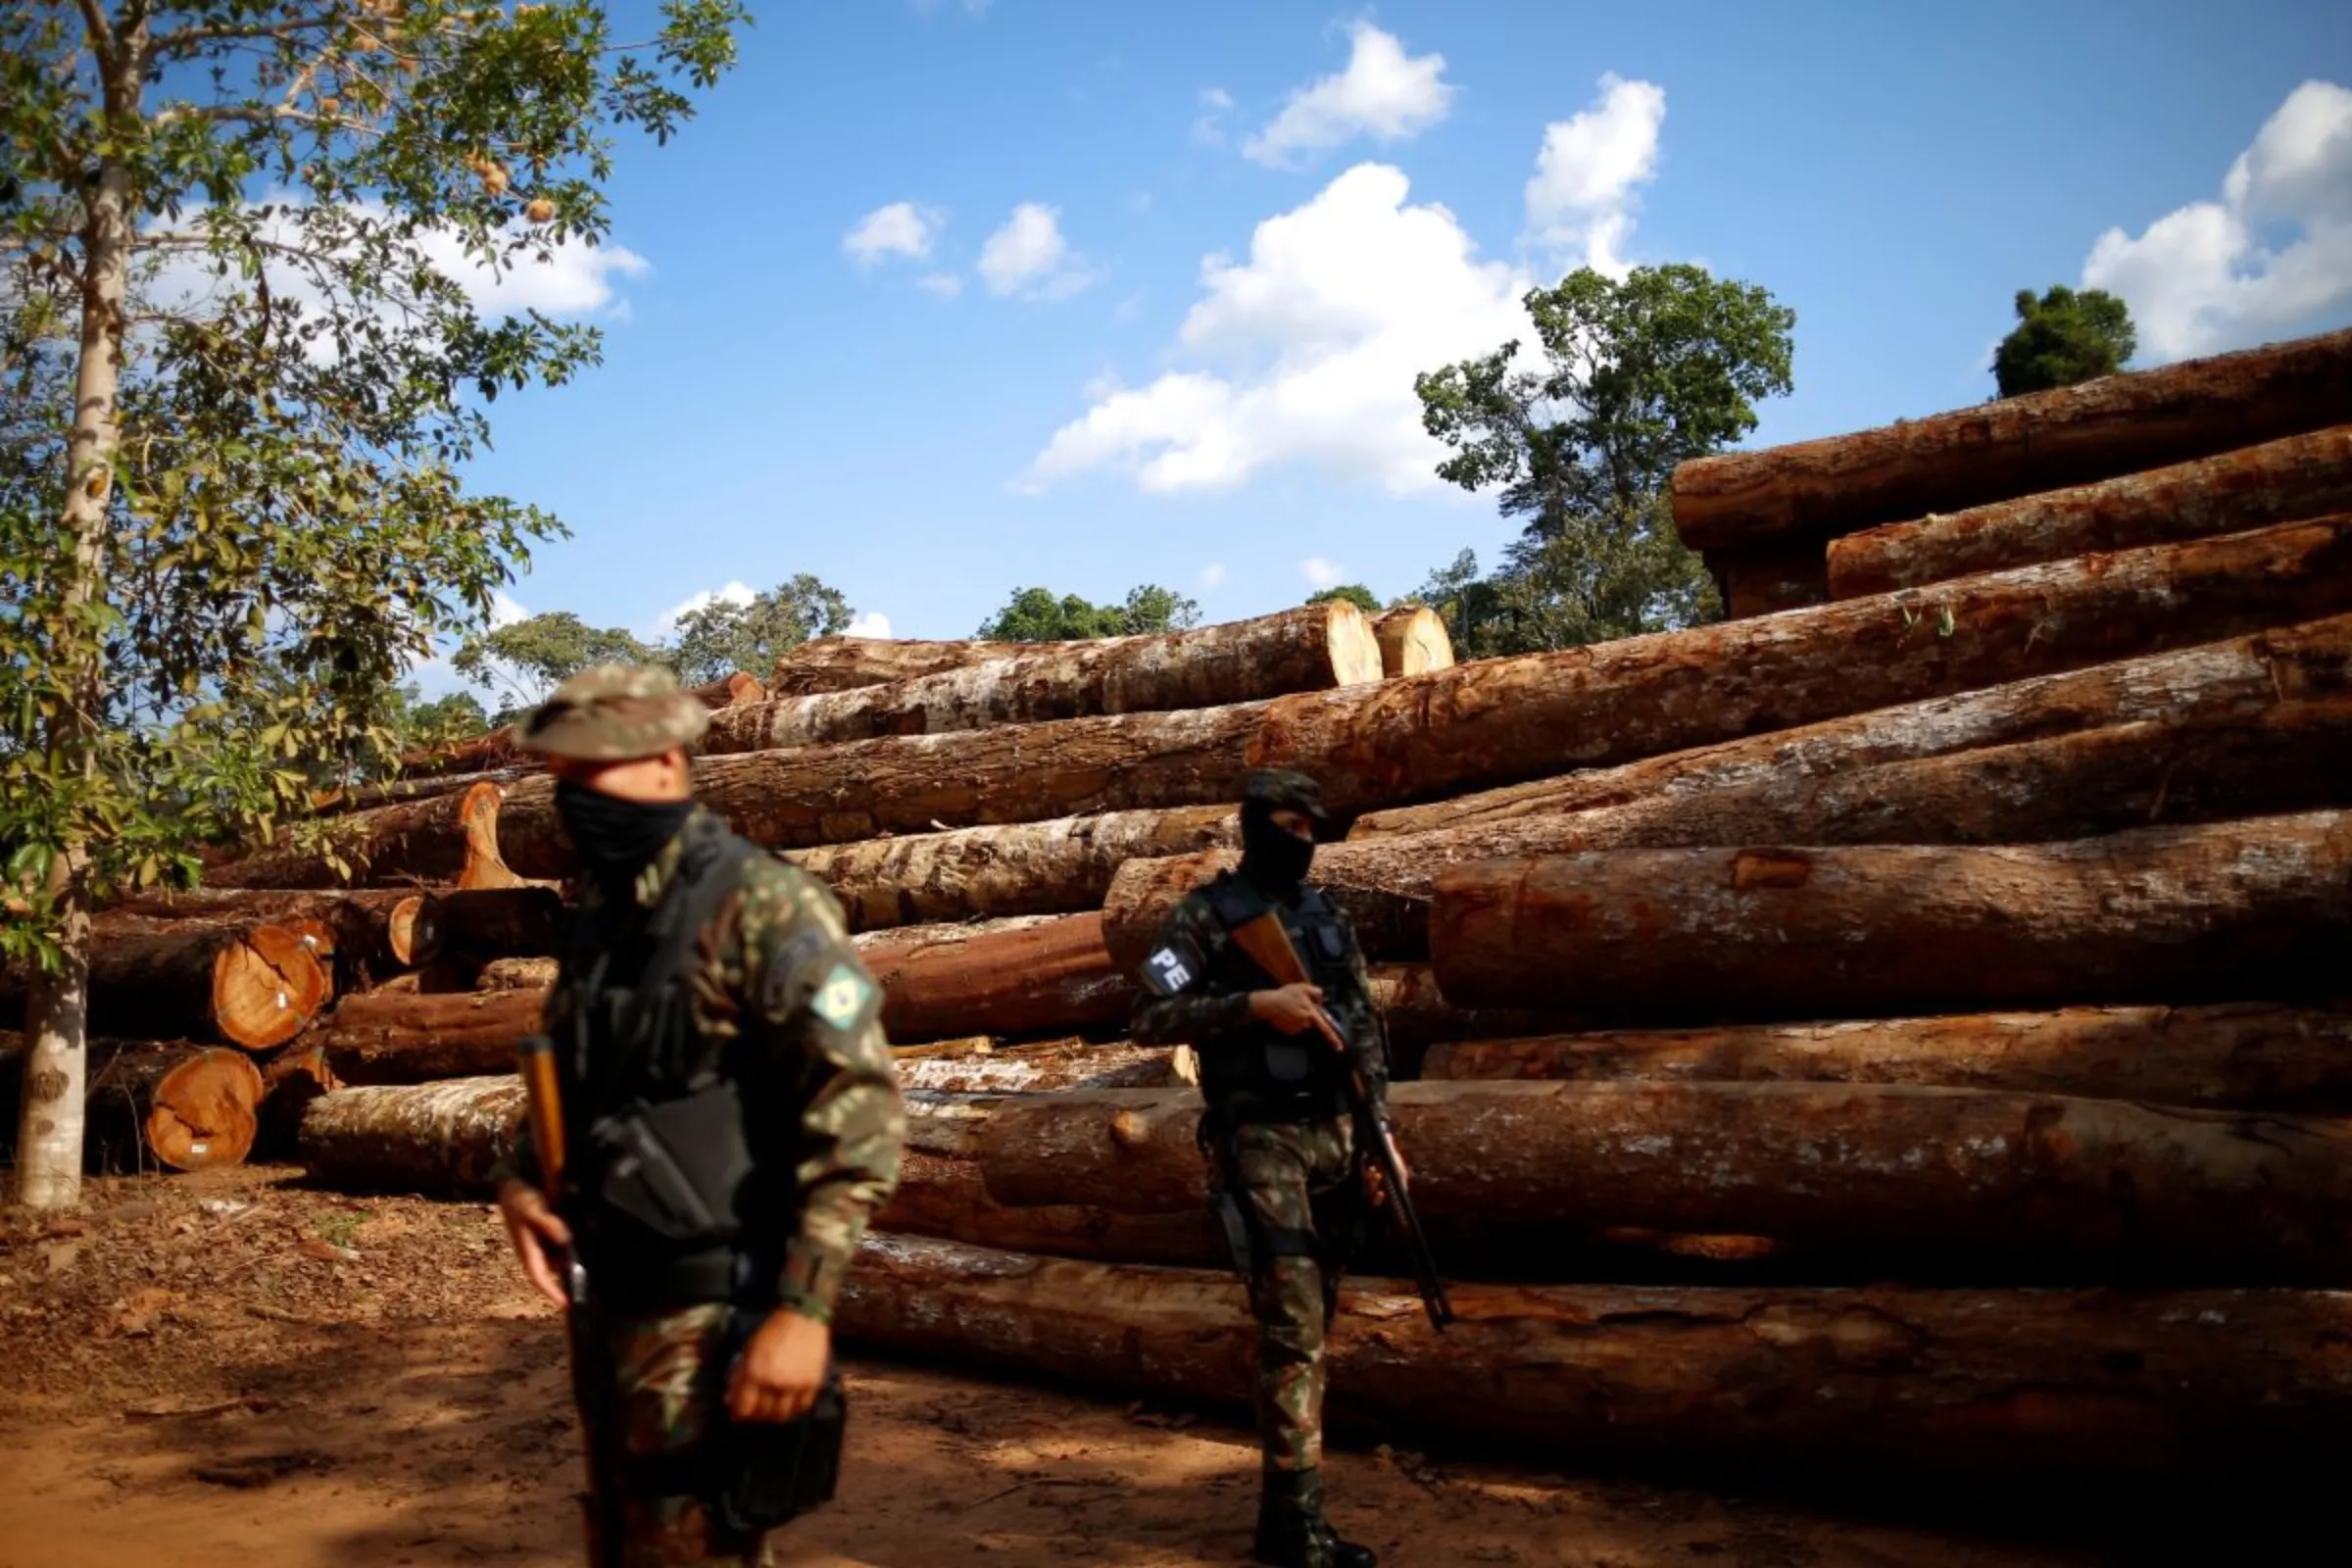 Brazilian Army soldiers are pictured near piles of legal wood in a wood company warehouse in the Amazon rainforest, inside Jamari National Forest Park in the County of Itapua do Oeste, Rondonia state, Brazil, September 28, 2021. REUTERS/Adriano Machado